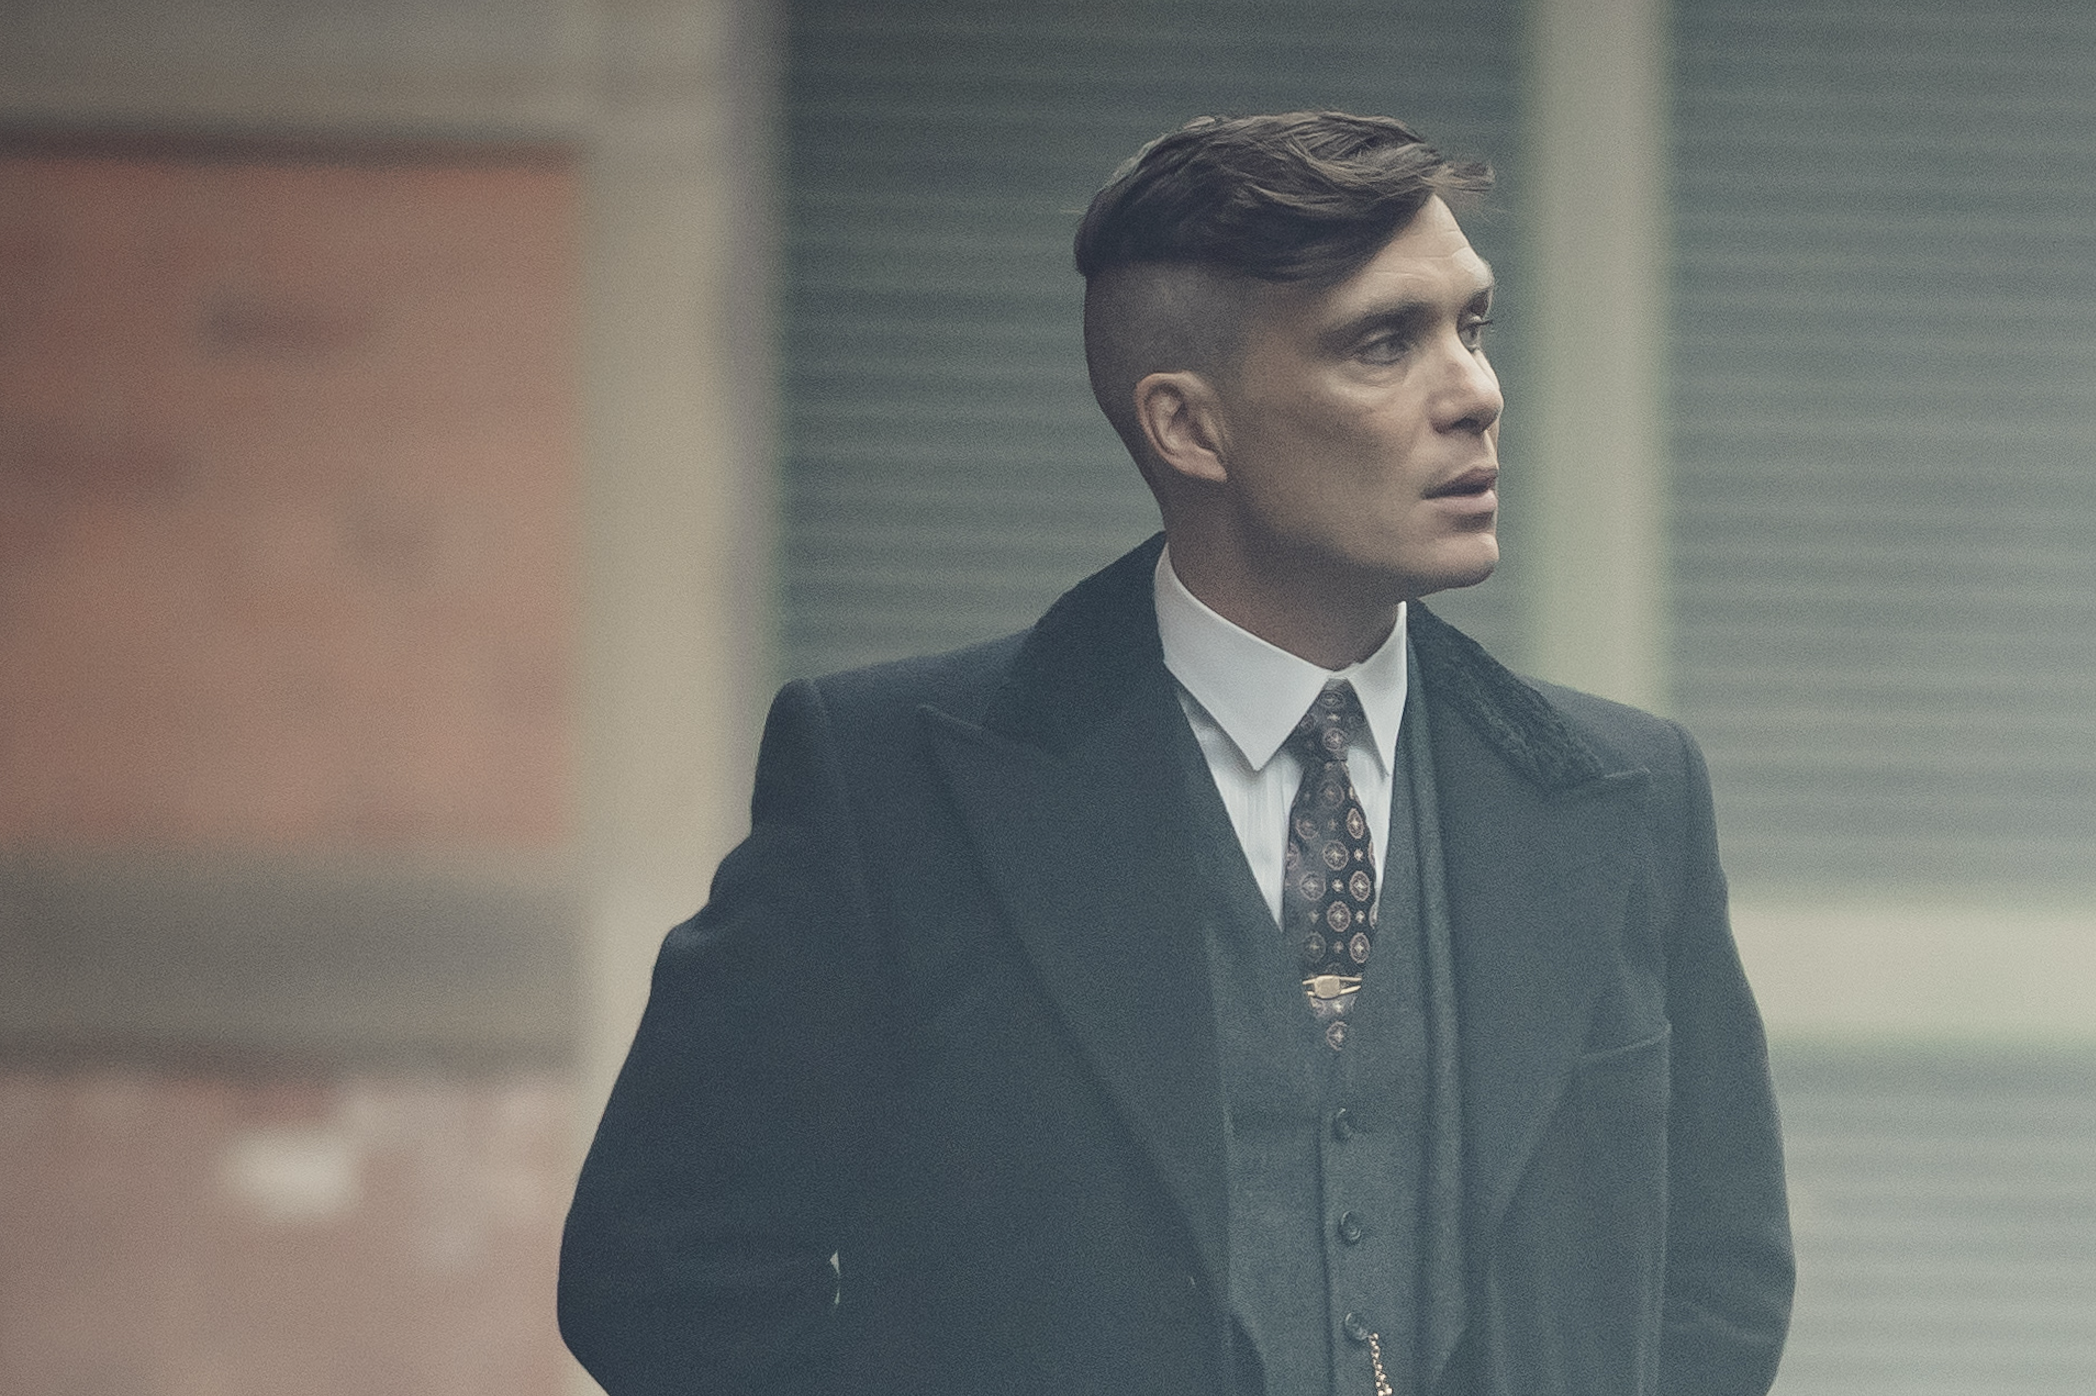 Thomas Shelby on Instagram: “If you want to dress up like Tommy